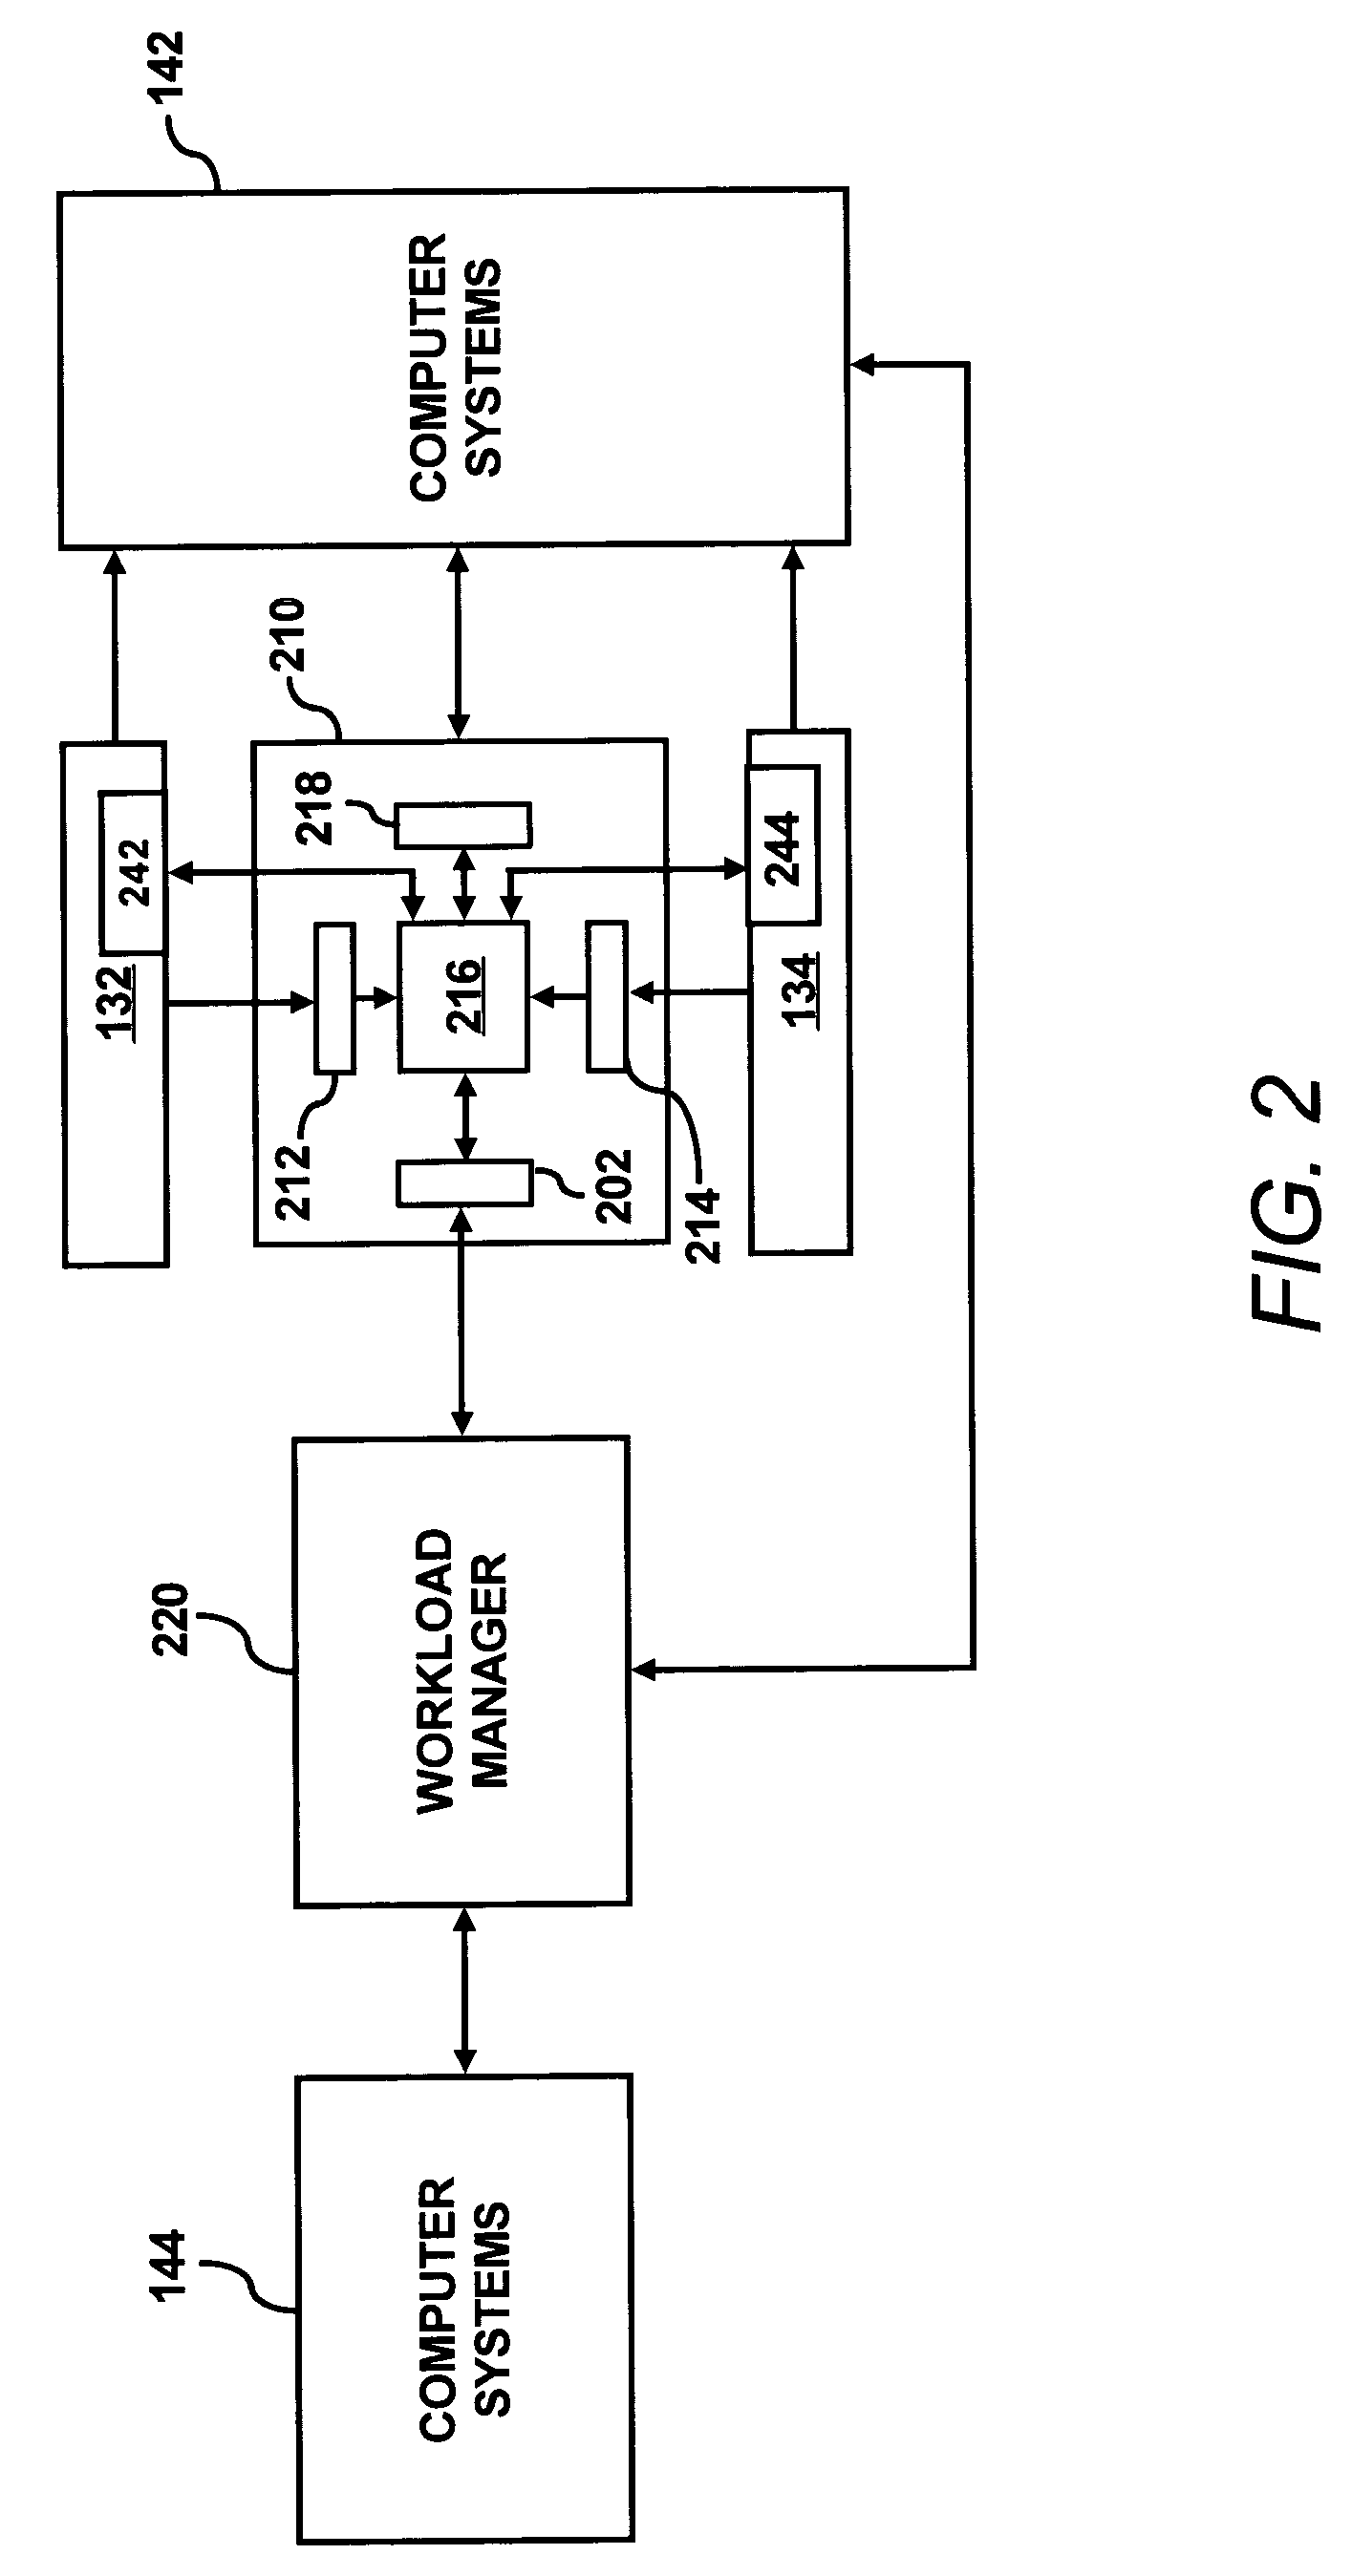 Supplying power to at least one electrical device based on an efficient operating point of a power supply